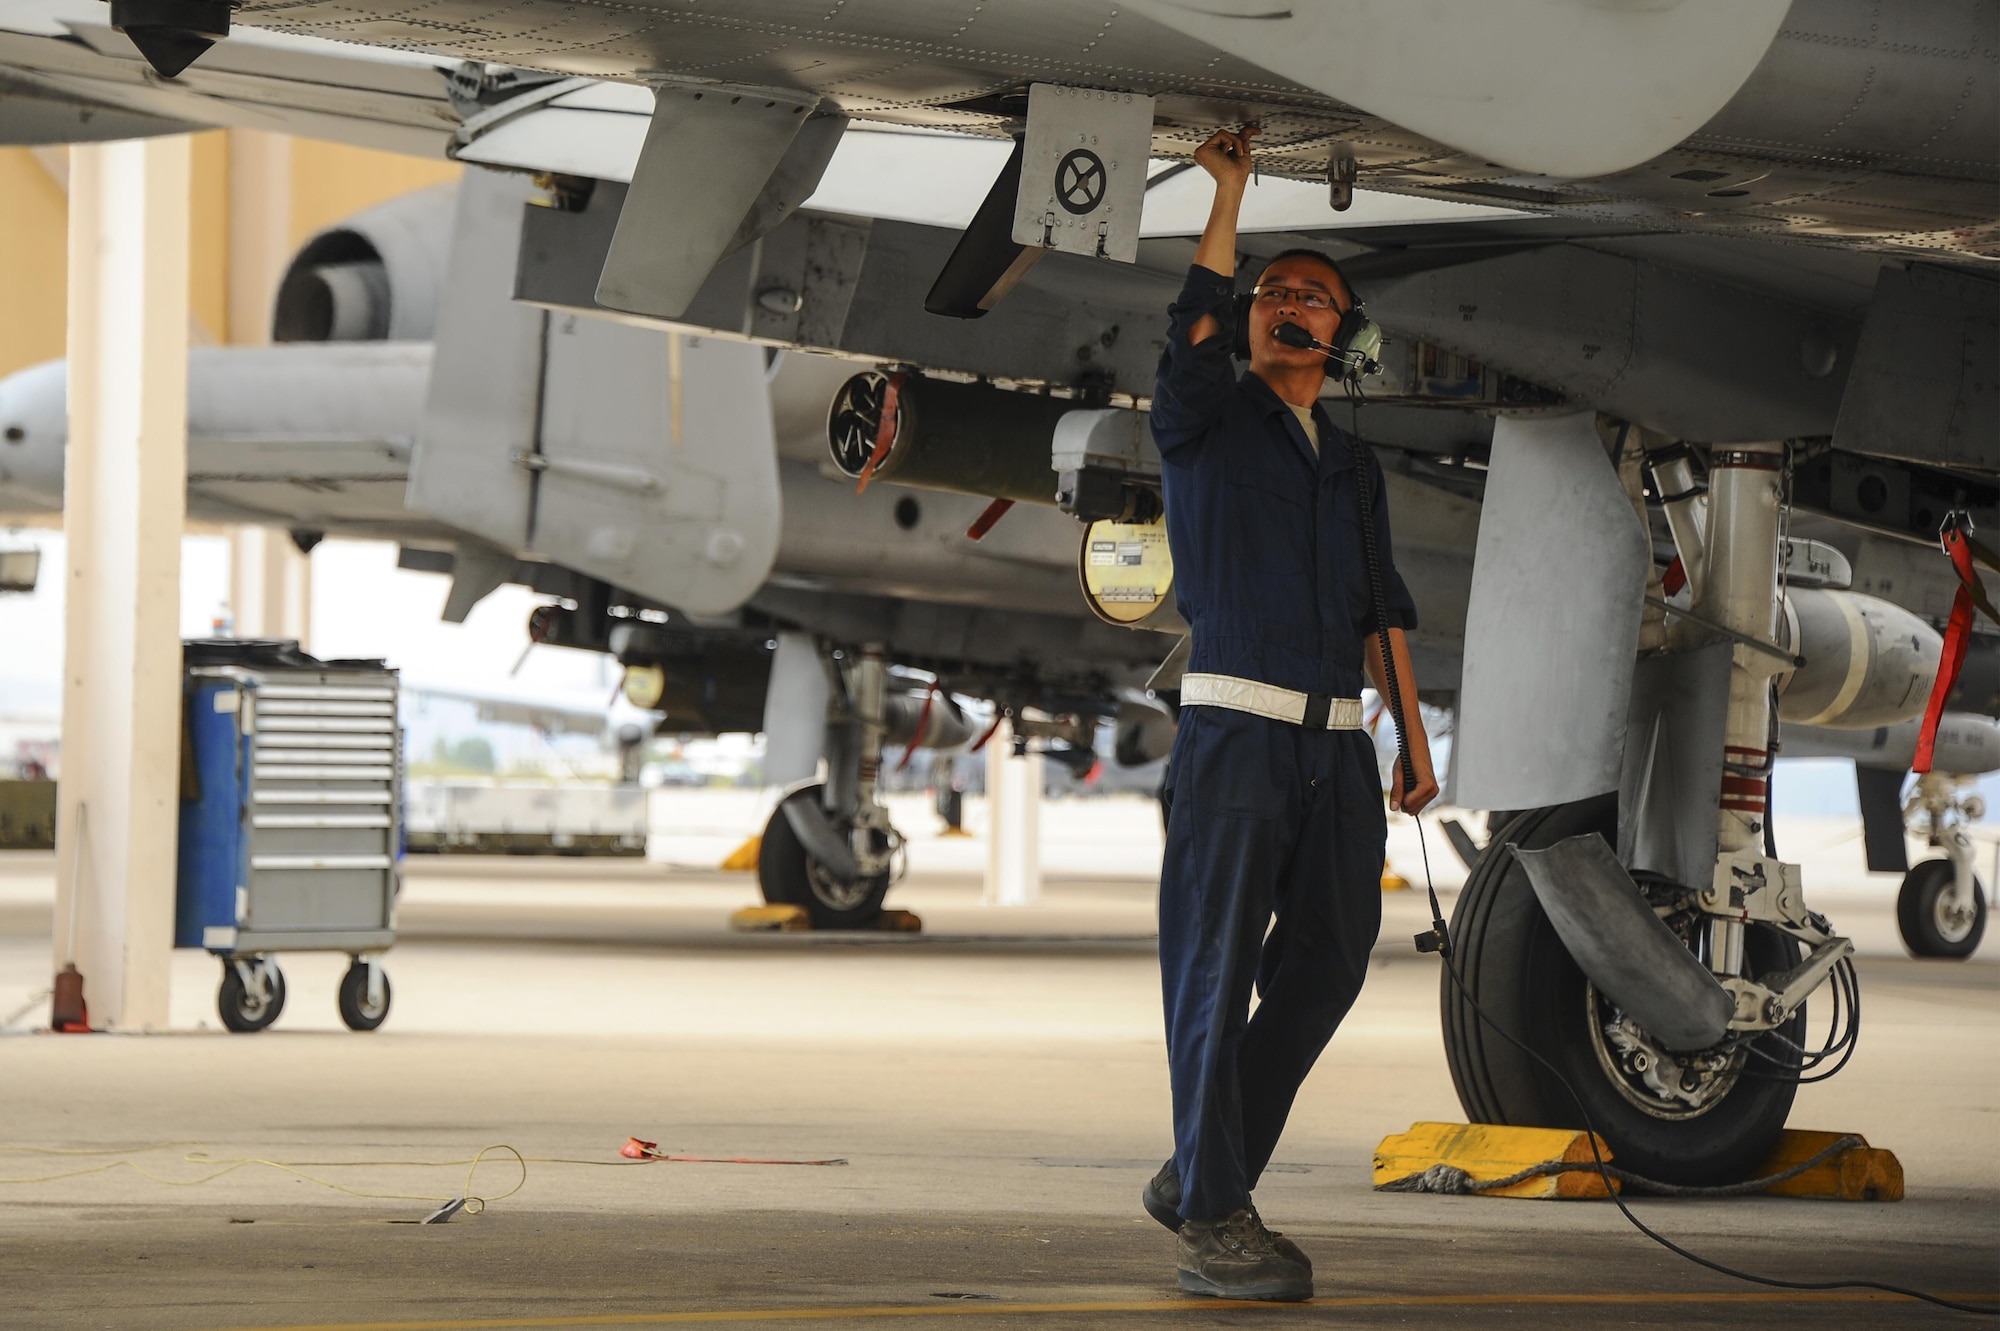 U.S. Air Force Senior Airman Andy Bui, 355th Aircraft Maintenance Squadron A-10C Thunderbolt II crew chief, closes a snap panel of an A-10 on the flightline at Davis-Monthan Air Force Base, Ariz., June 23, 2016. The 355th AMXS provides safe and properly configured aircraft in order to meet mission requirements for three squadrons. (U.S. Air Force photo by Airman 1st Class Mya M. Crosby/Released)